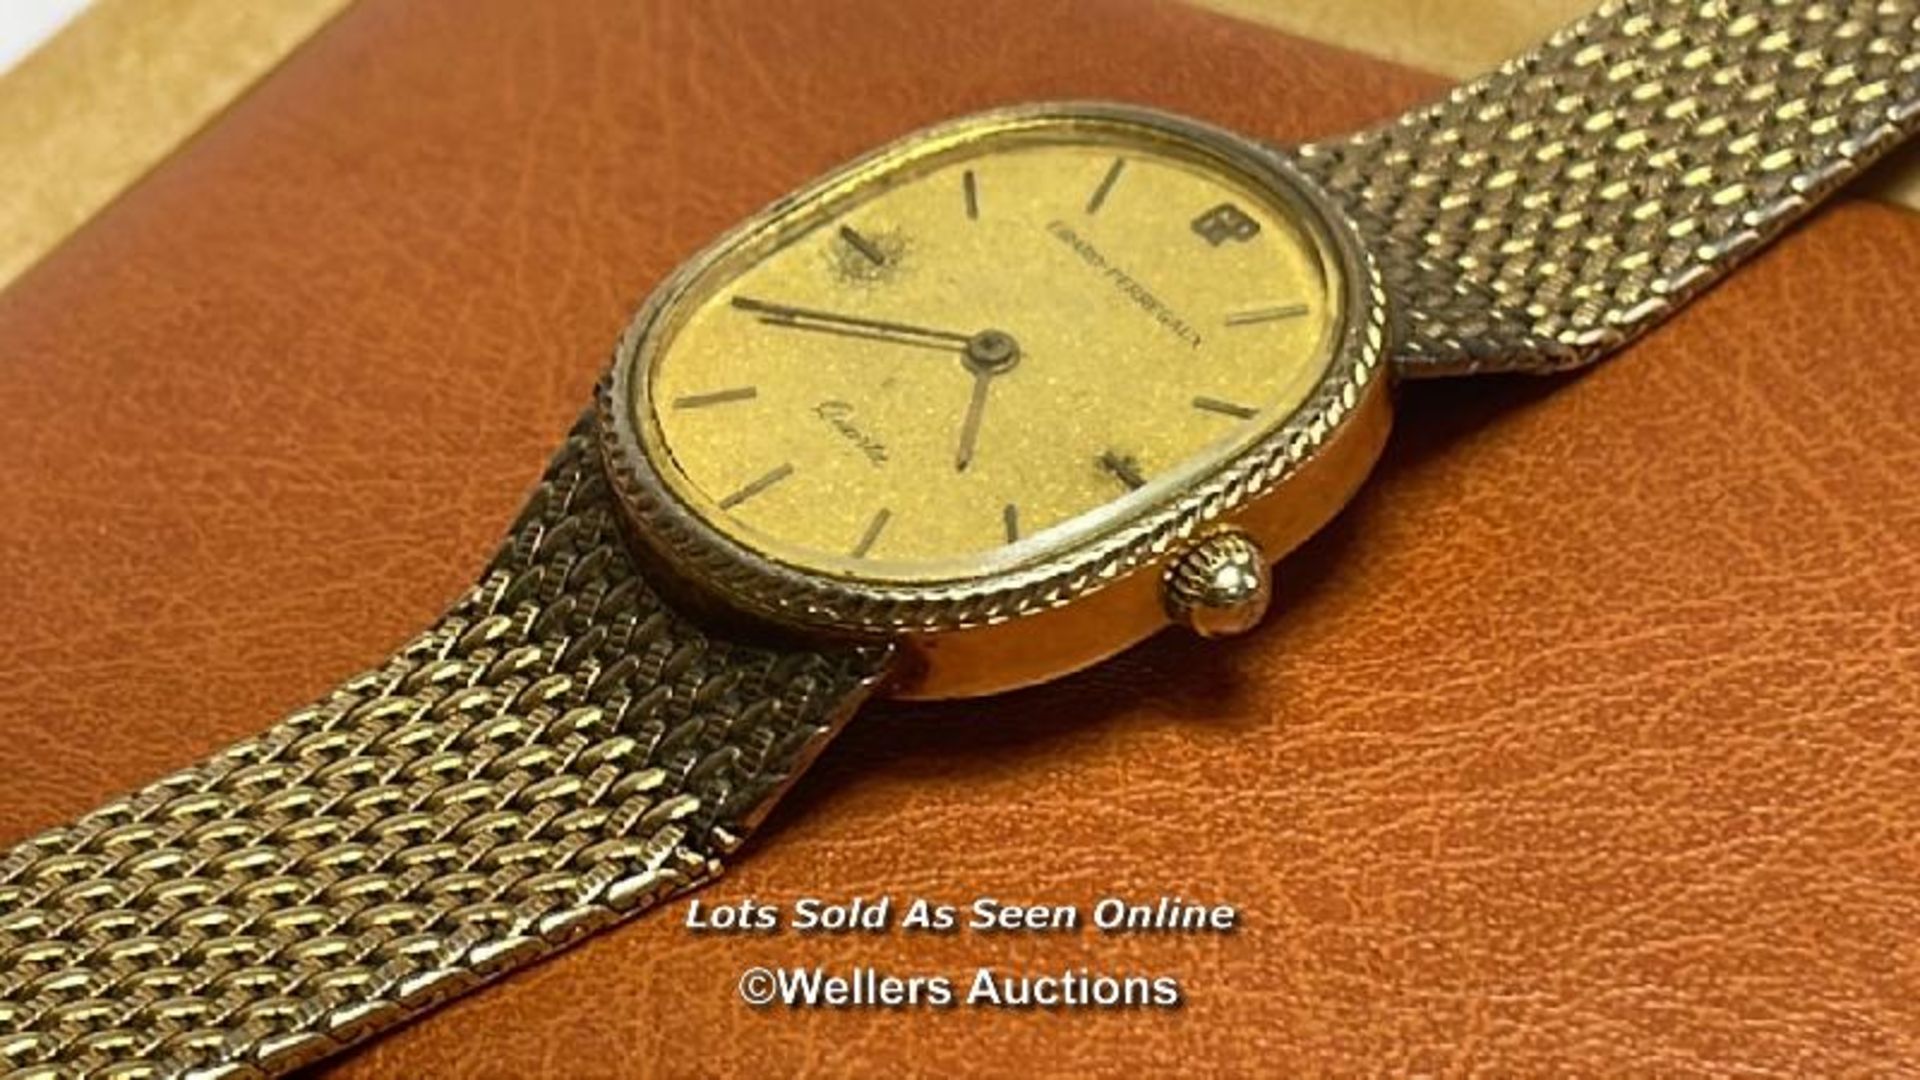 Vintage Girrard Perregaux ellipse gold plated dress watch, 2.5cm wide dial with box - Image 3 of 12